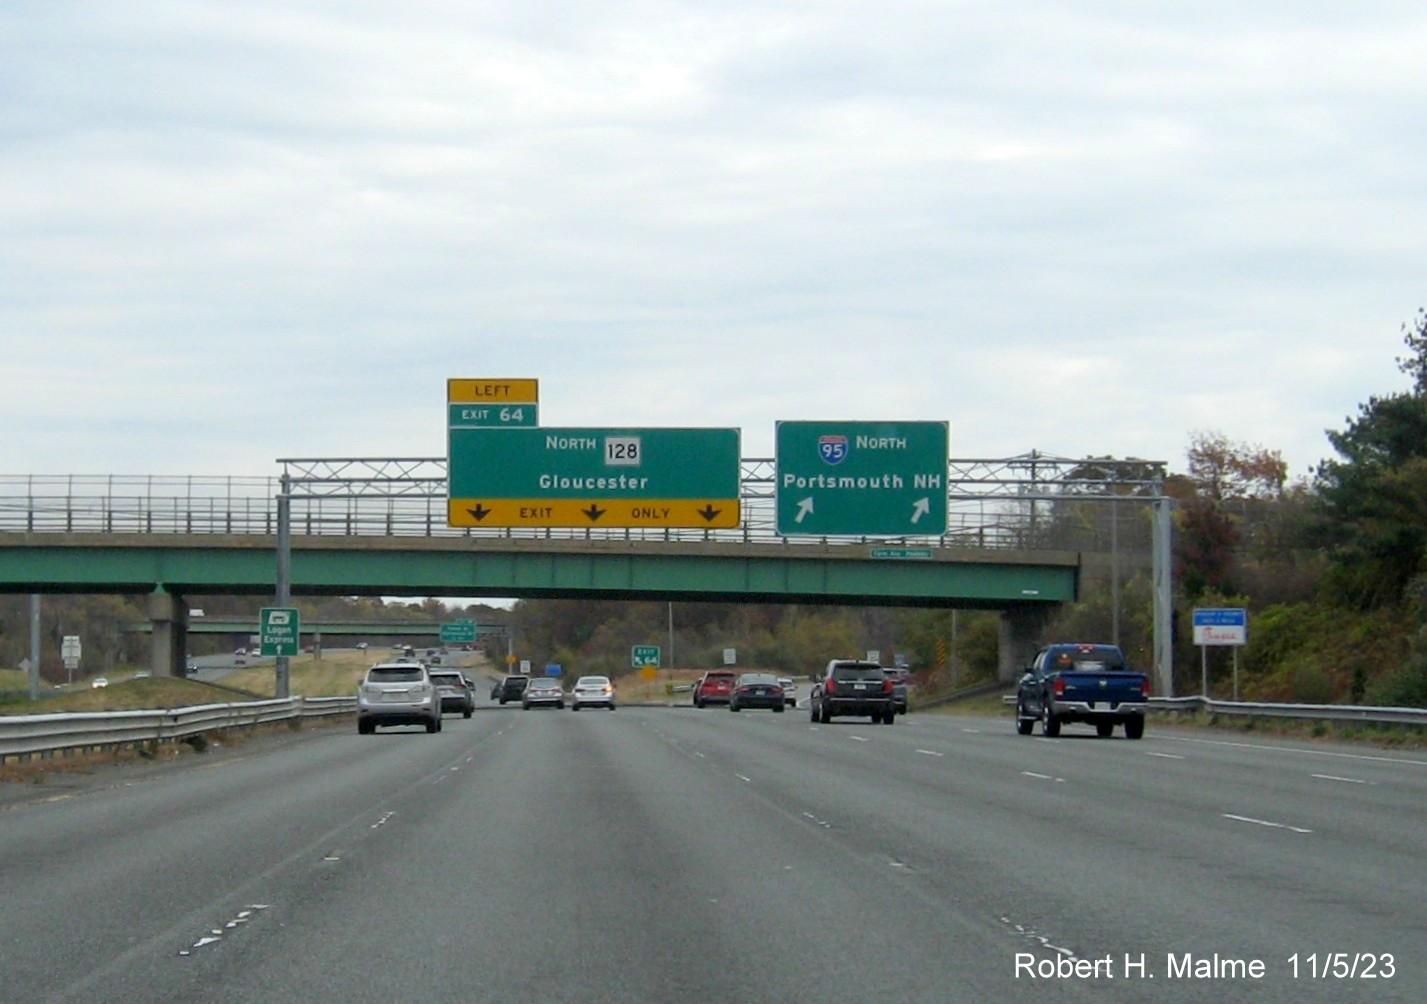 Image of overhead signage at MA 128 North exit on I-95 North in Peabody, November 2023